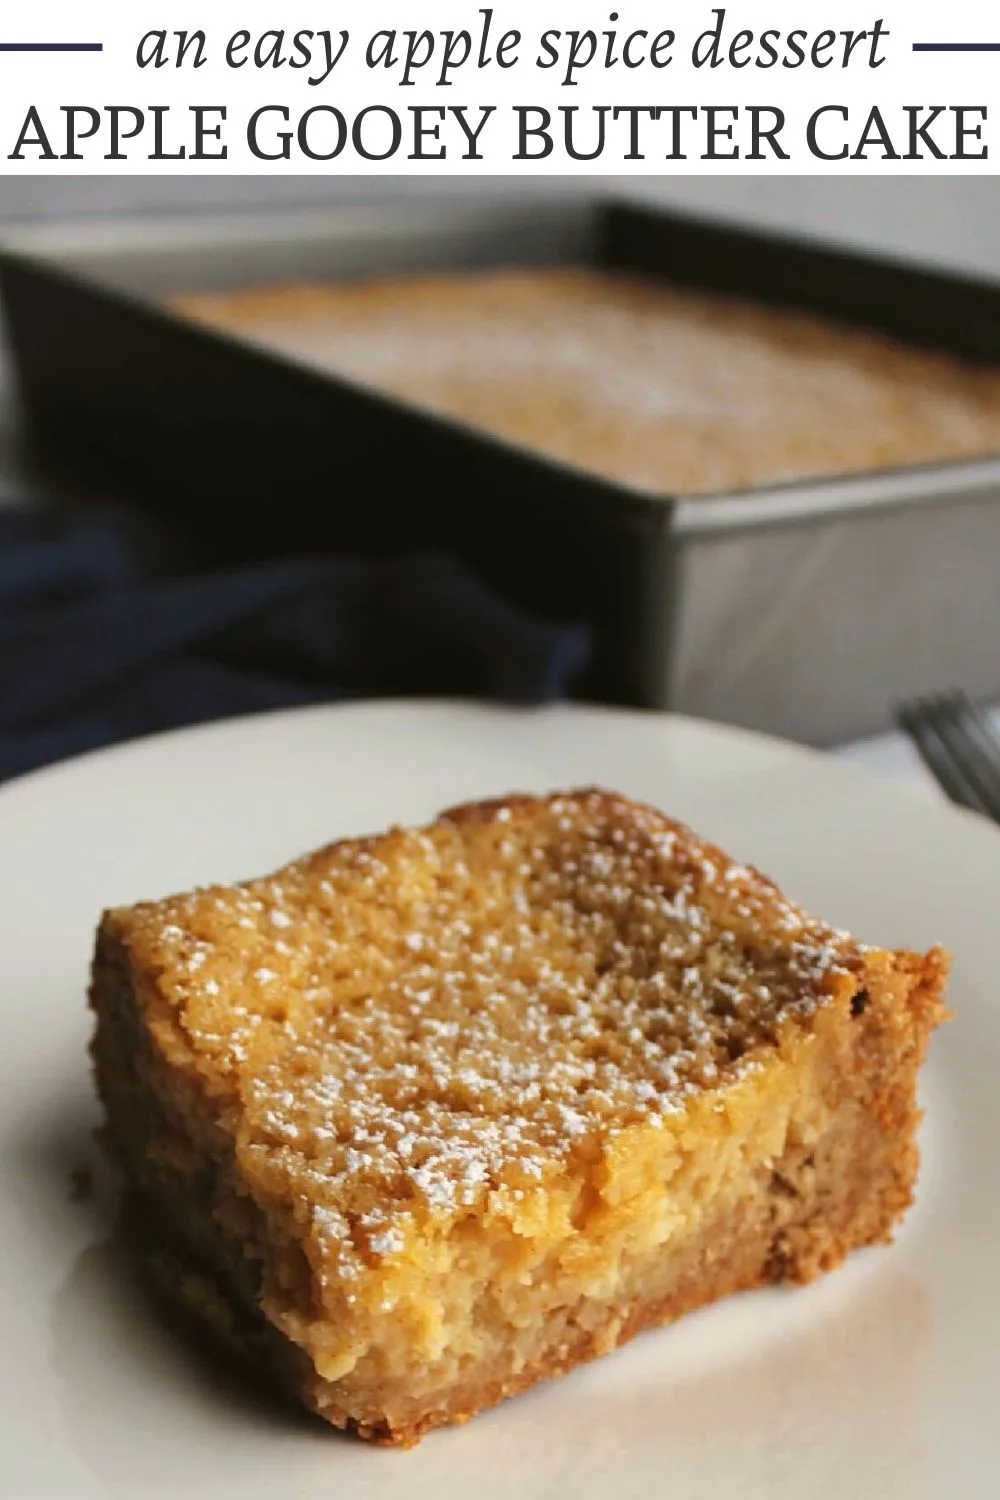 Apple gooey butter cake has all of the ooey gooey butter cake texture with spice cake and apple butter mixed in. It is a perfect fall treat that is easy to make and tastes unbelievable.